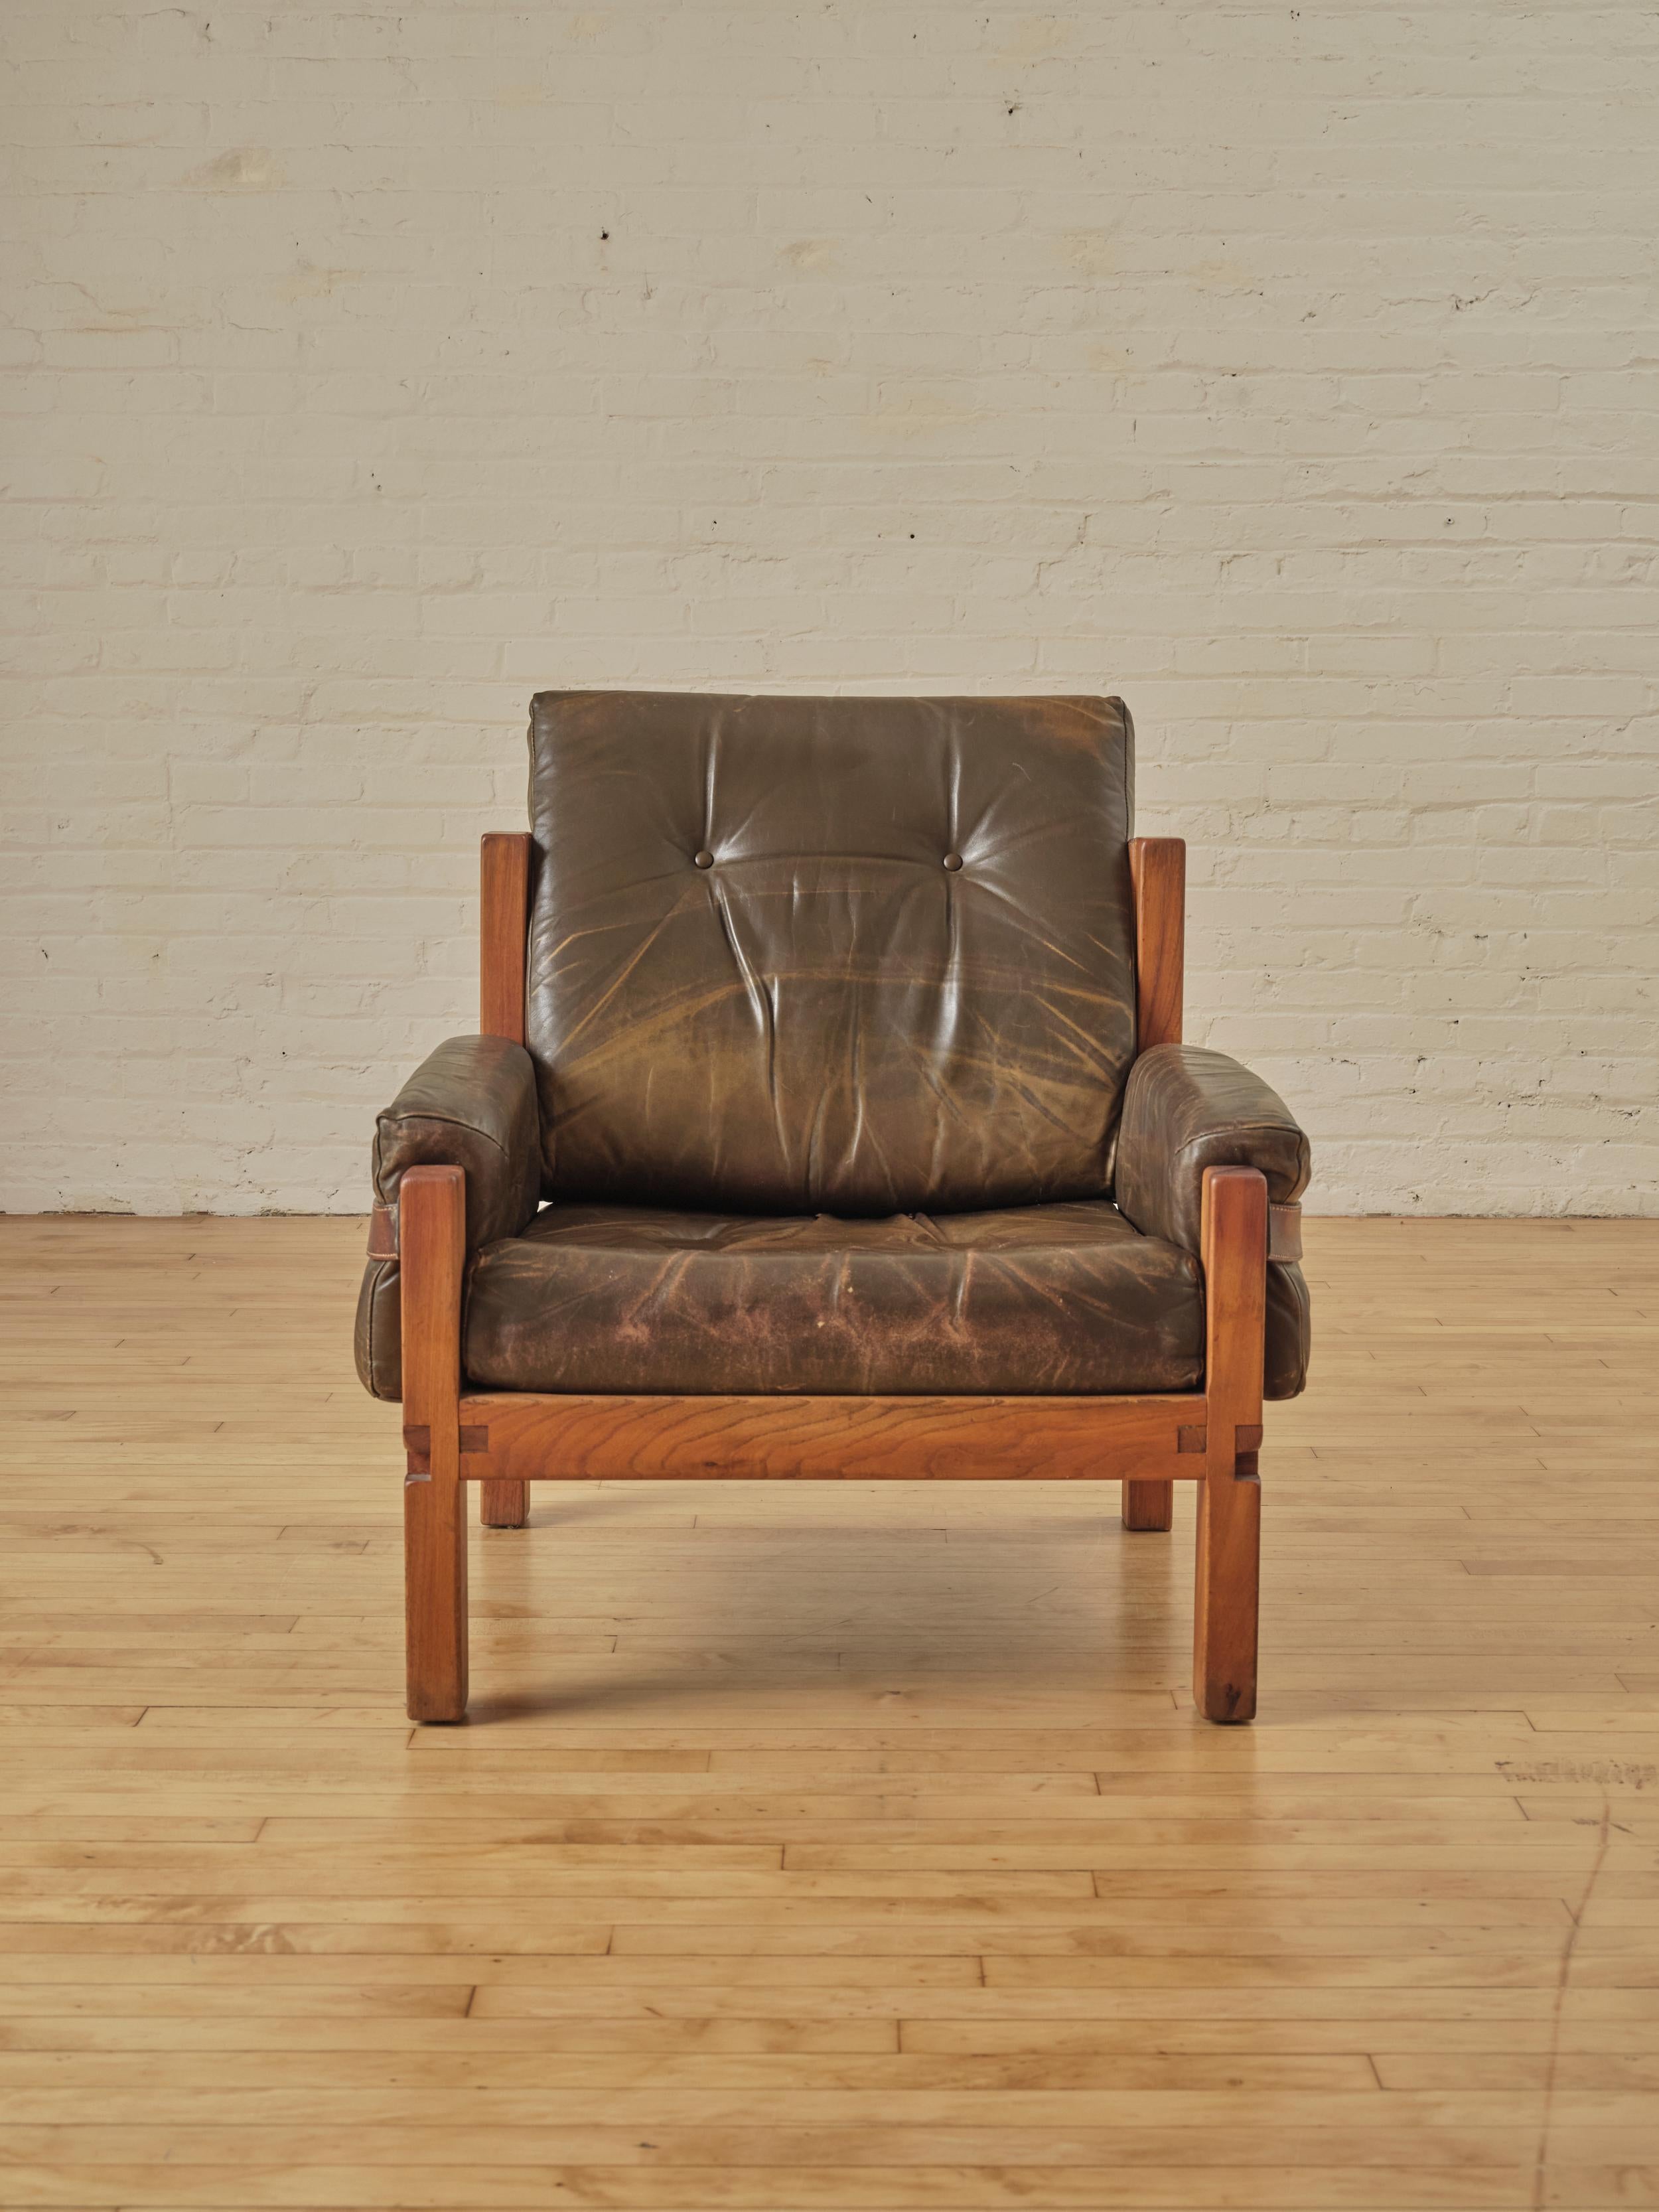  S15 Lounge Chair,  meticulously crafted by Pierre Chapo, in his own atelier. This  piece is an example of his artistry. Every detail, from the ergonomic comfort with leather seating, to the choice of wood, to the joinery techniques, reflects his